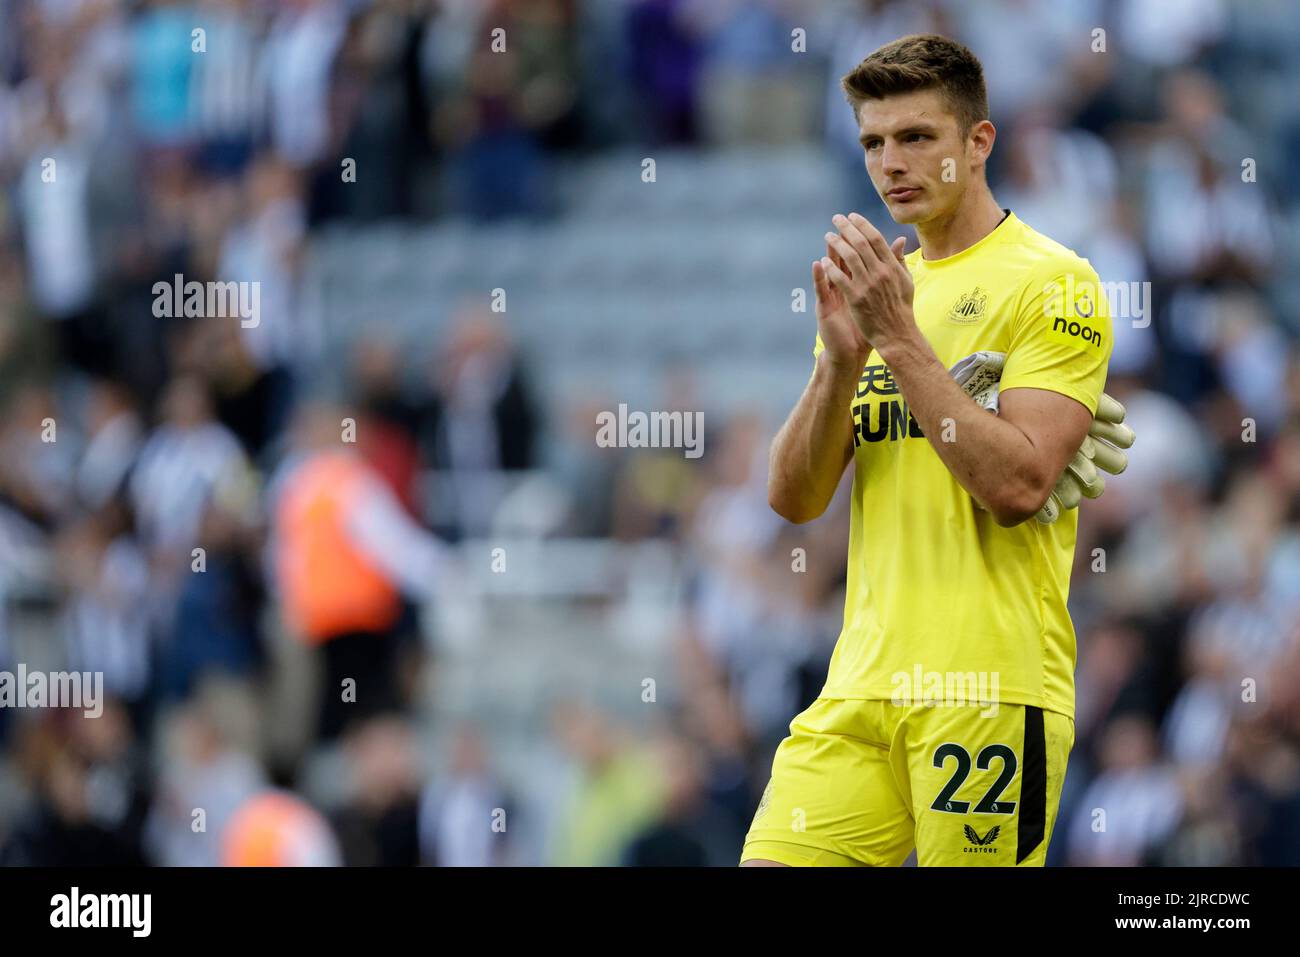 NICK POPE, NEWCASTLE UNITED FC, 2022 Banque D'Images